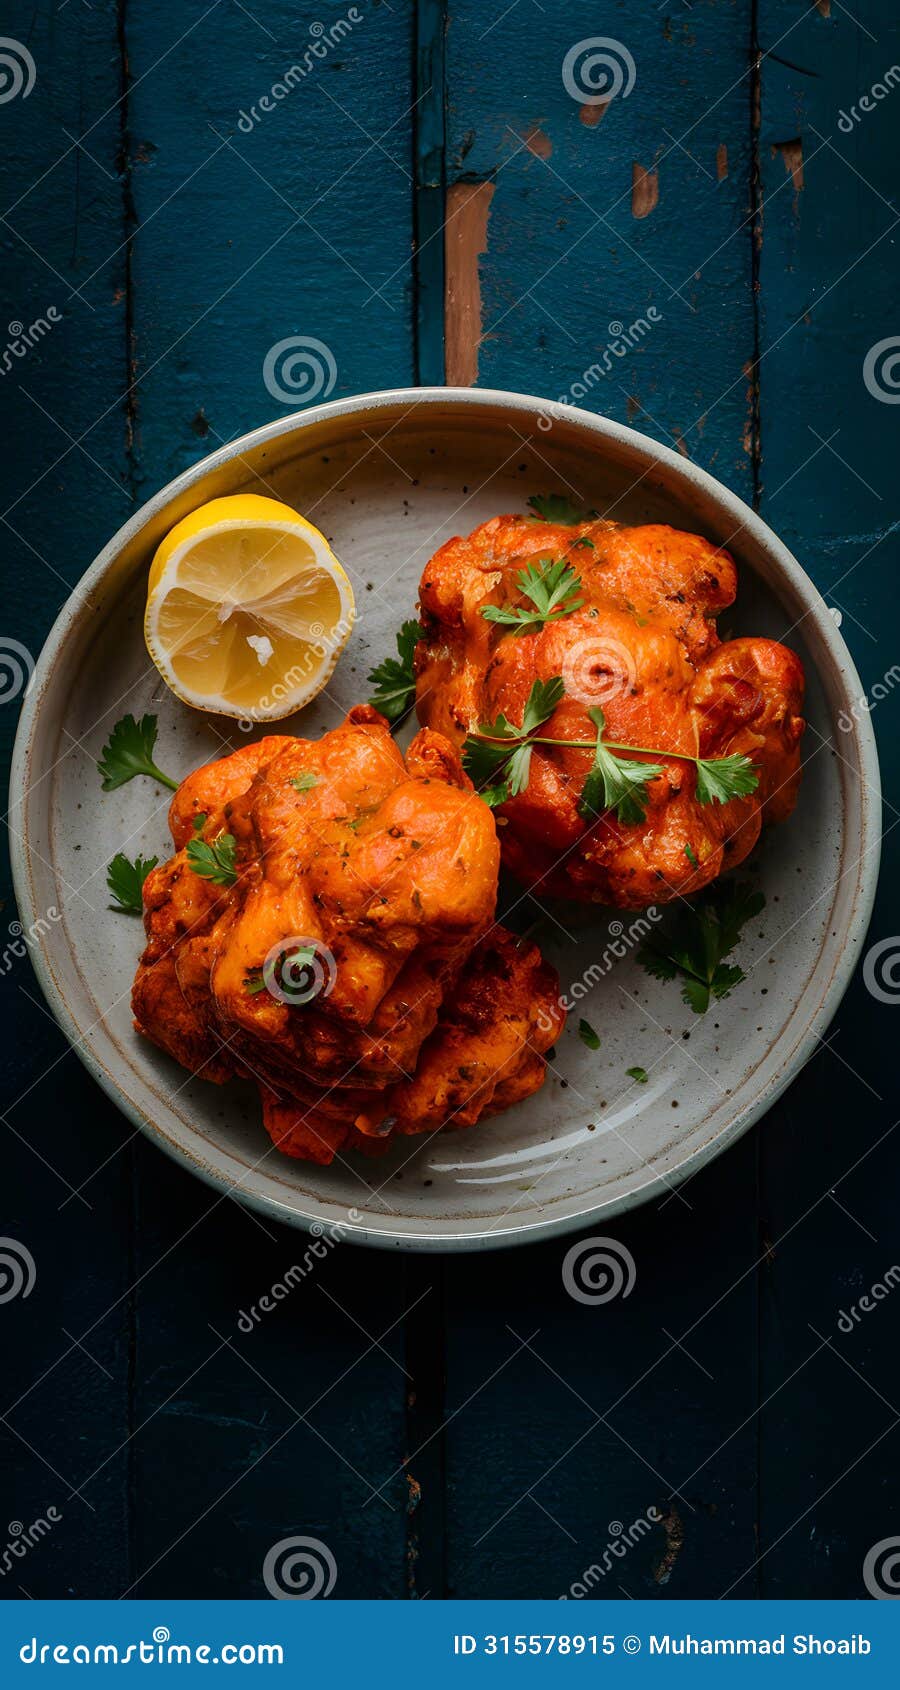 flavorful chicken malai boti served with lemon on a dish